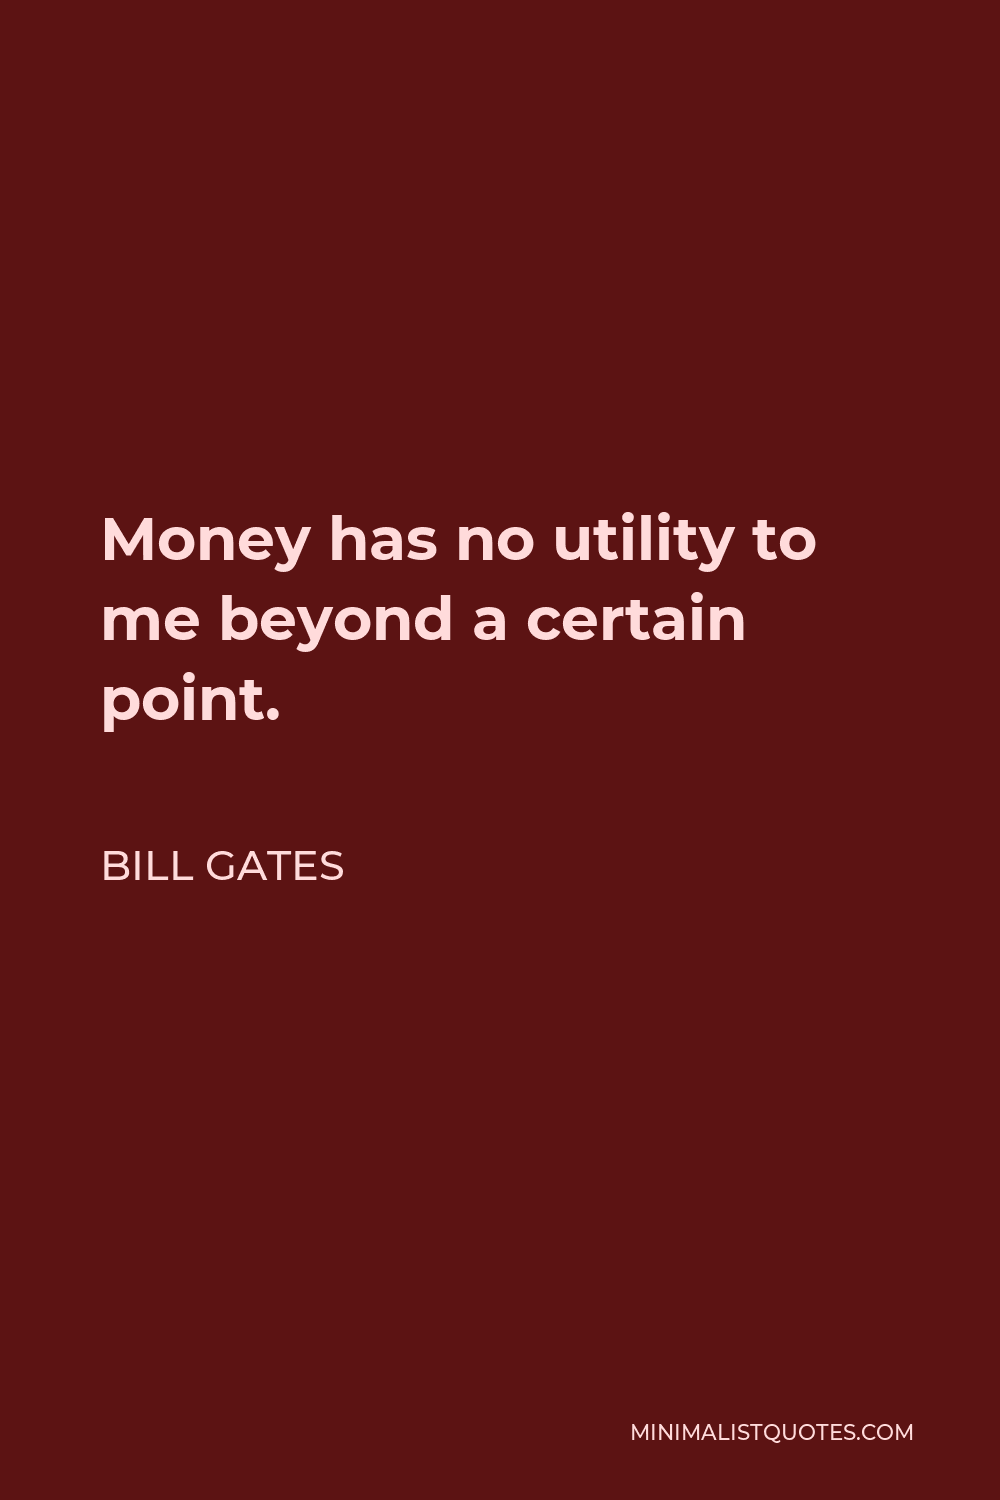 Bill Gates Quote - Money has no utility to me beyond a certain point.